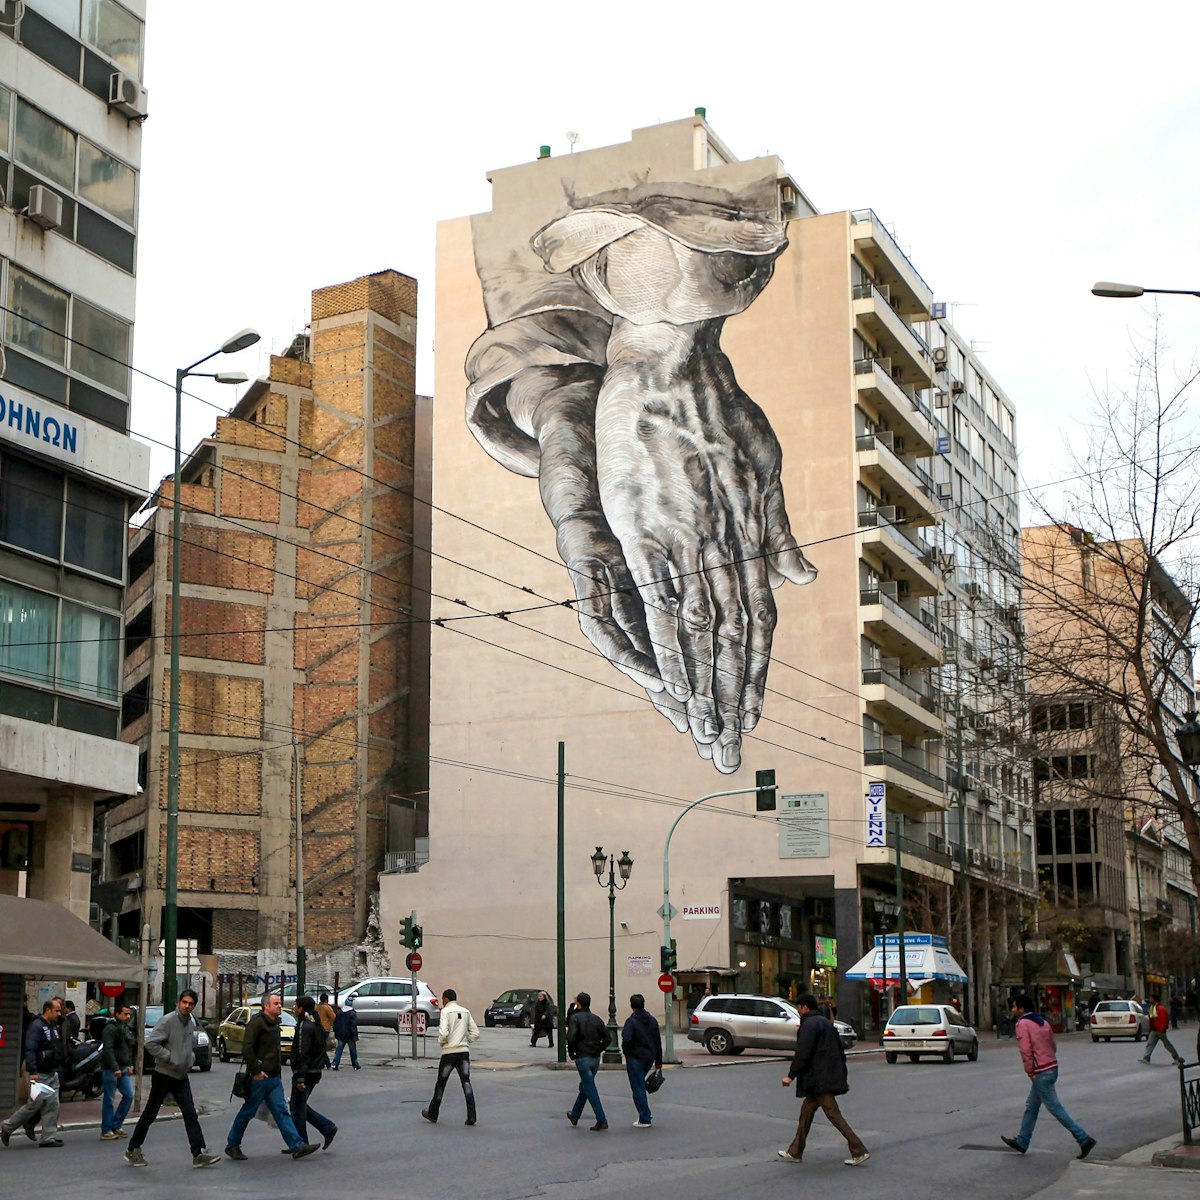 ATHENS, GREECE - FEBRUARY 18: Members of the public walk beneath a giant mural based on Albrecht Durer's 'Praying Hands' on February 18, 2012 in Athens, Greece. Following a meeting on Wednesday, finance ministers across the Eurozone are calling for greater scrutiny and oversight of Greece's proposed budget cuts in order to approve the latest 130 billion euro bailout package. The package, which is anticipated to be finalised on February 20, 2012, is essential for Greece to avoid defaulting on a 14.5 billion euro bond it is due to repay in mid-March.   (Photo by Oli Scarff/Getty Images)
139271791